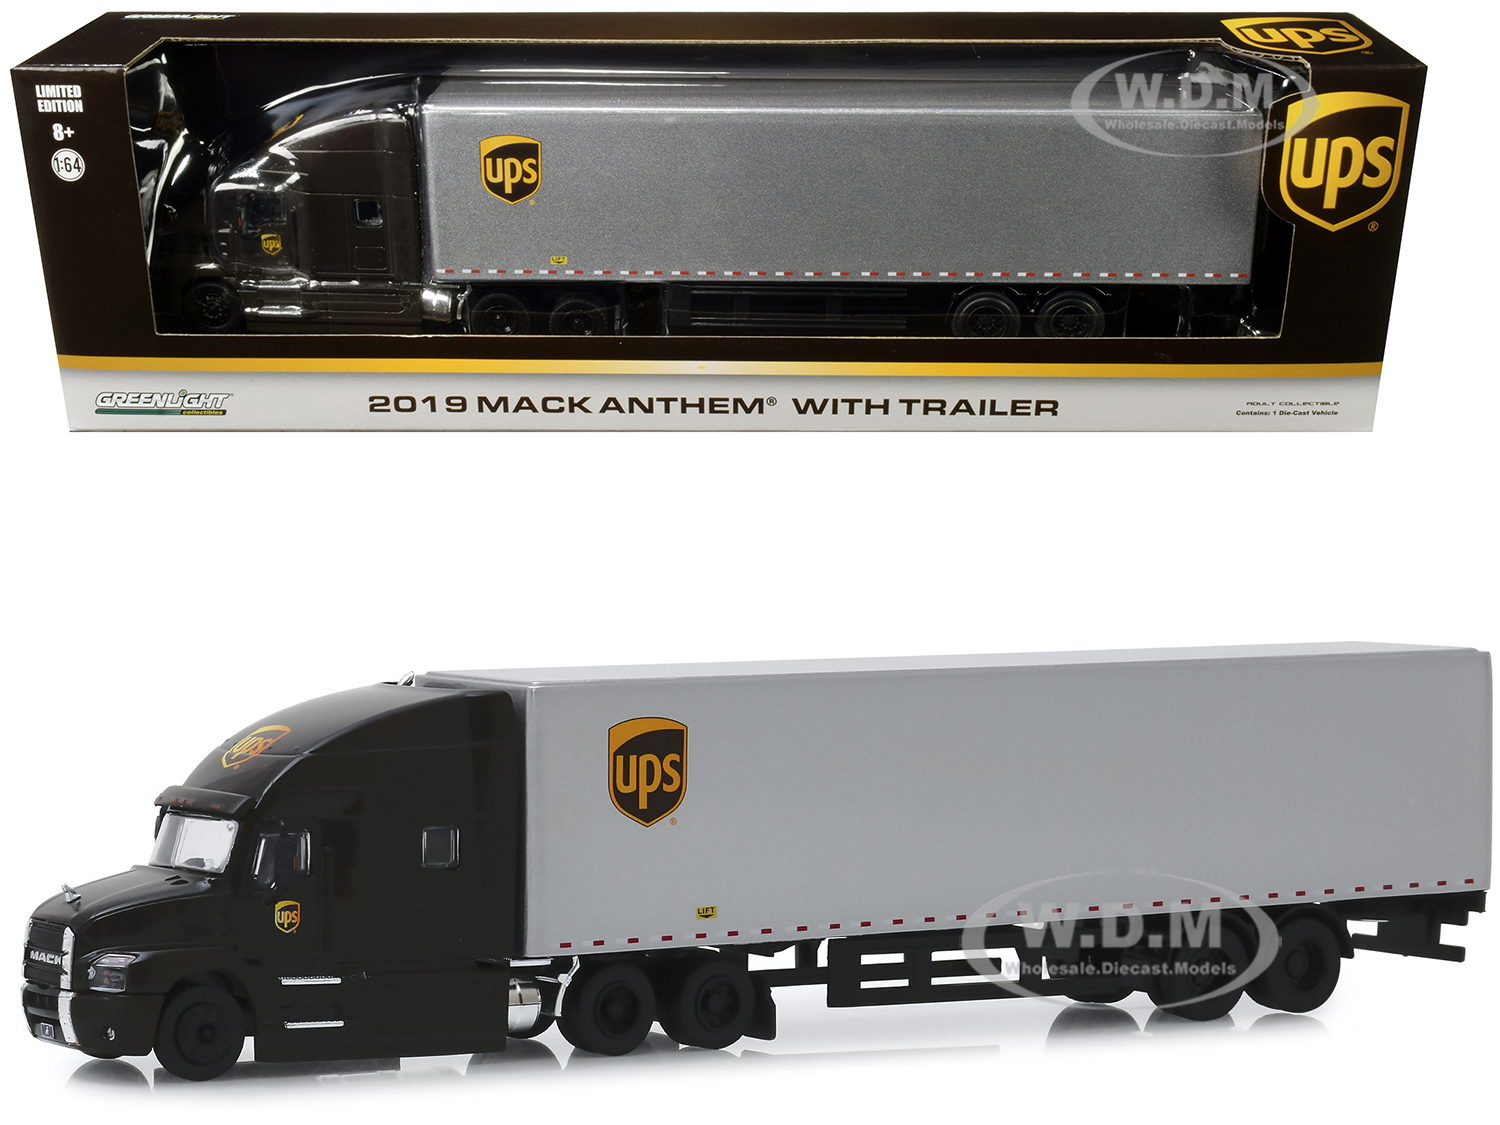 2019 Mack Anthem With Trailer "united Parcel Service" (ups) 1/64 Diecast Model By Greenlight